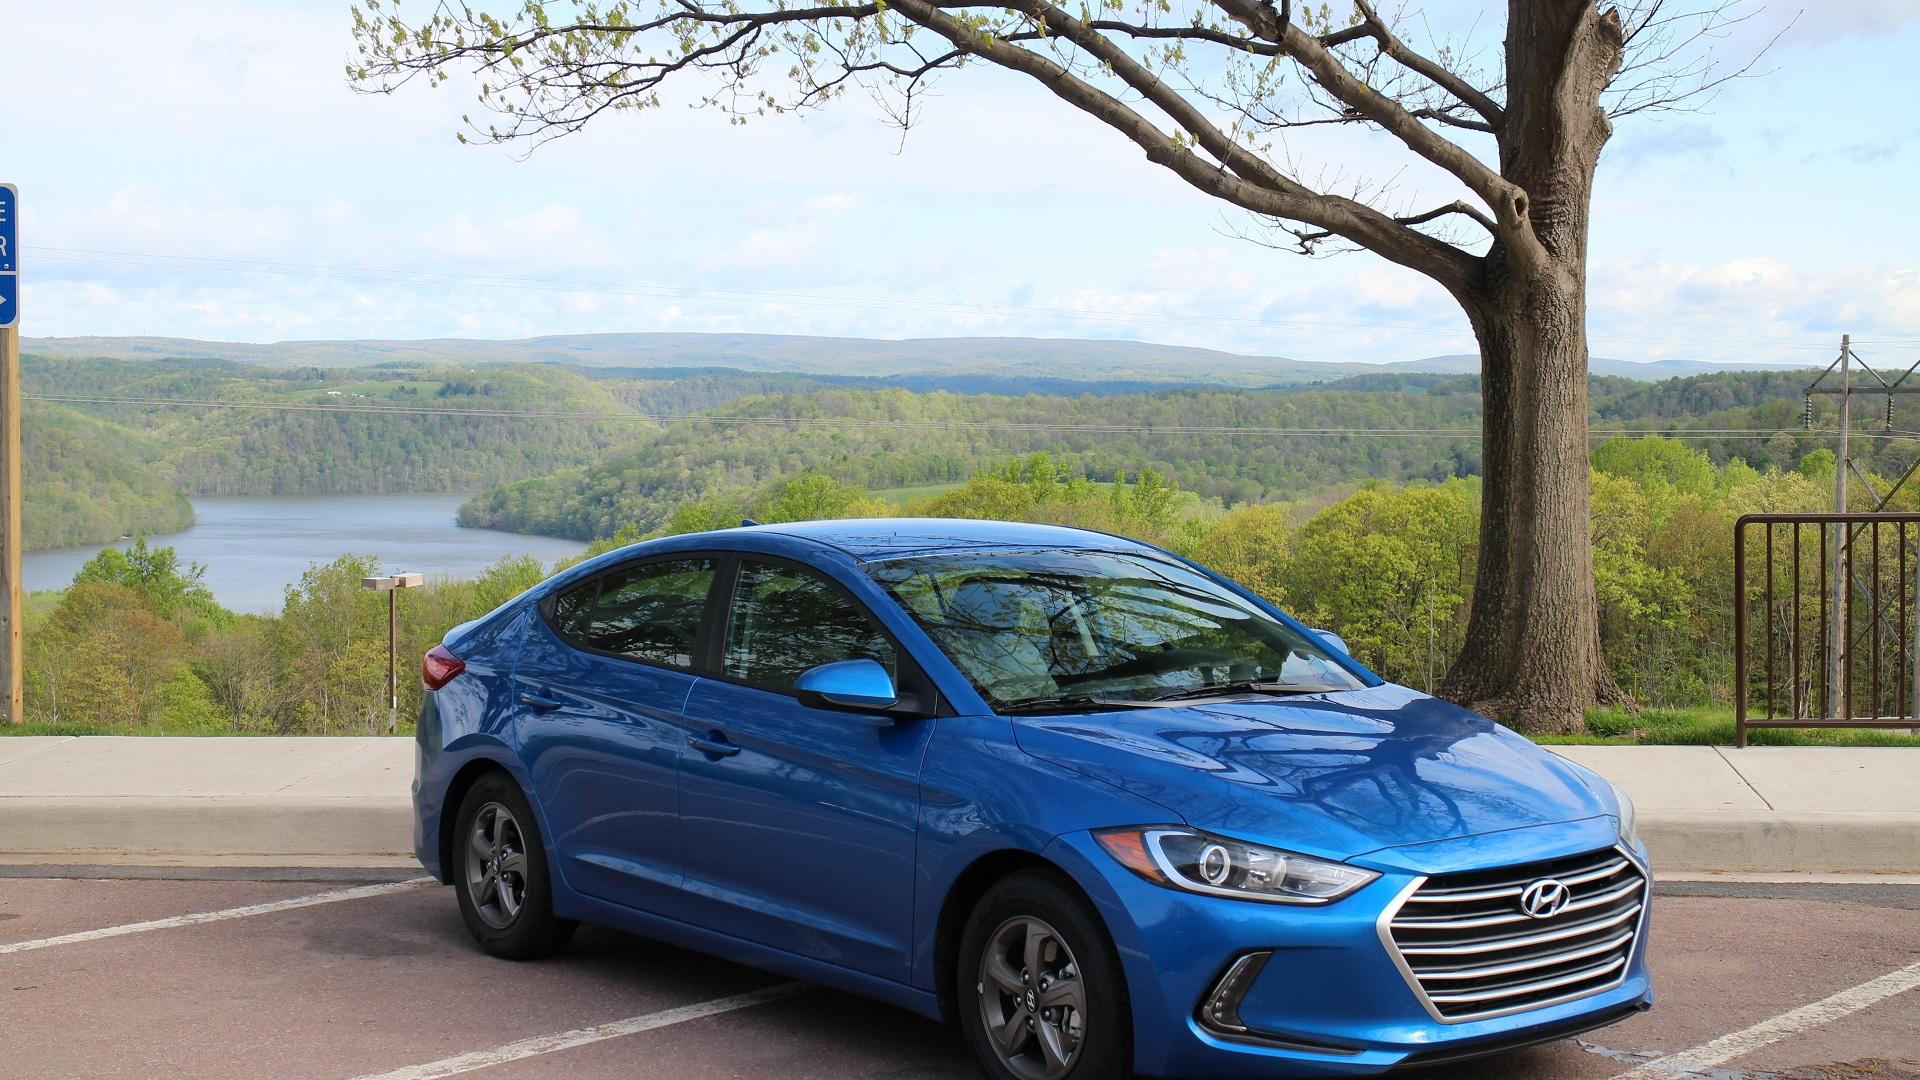 2017 Hyundai Elantra Eco road trip, May 2016 - Maryland's welcome center wins "Most Scenic' award